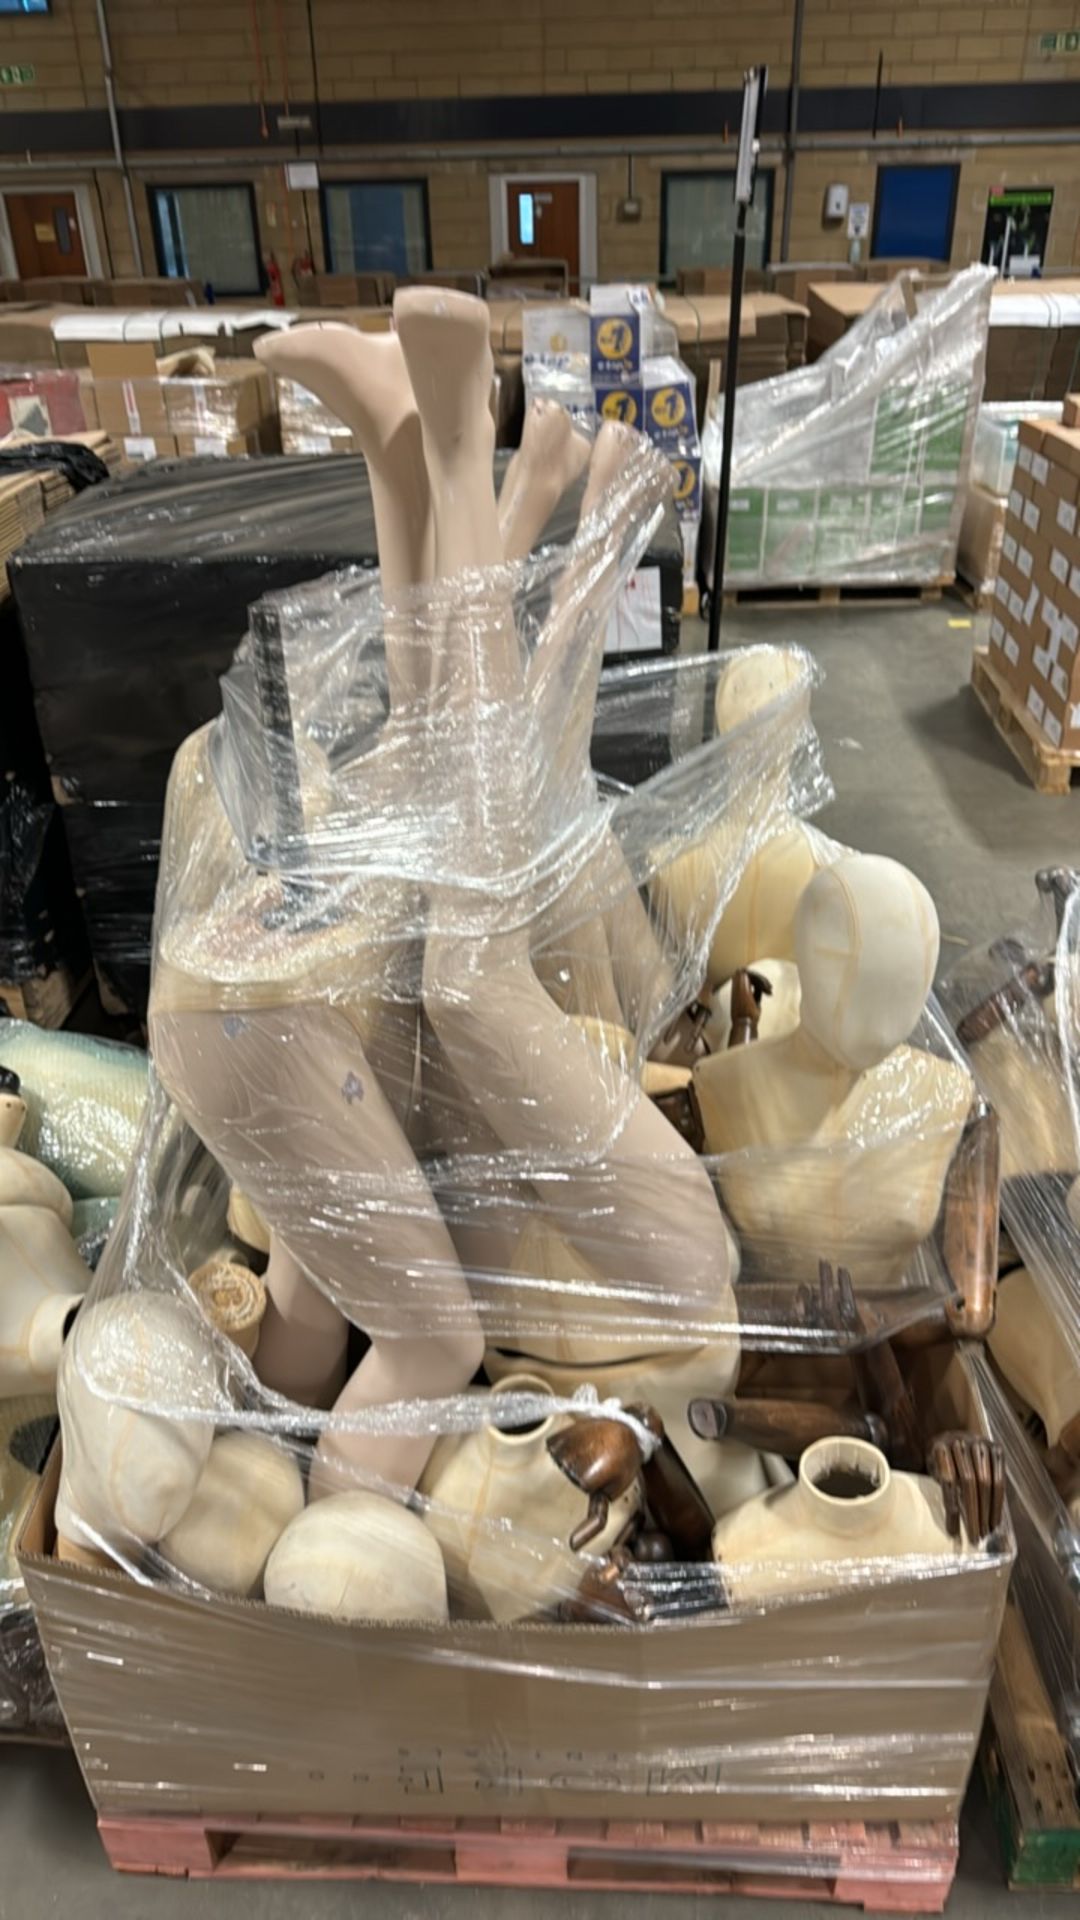 Pallet Of Mixed Manequin Busts - Image 2 of 3